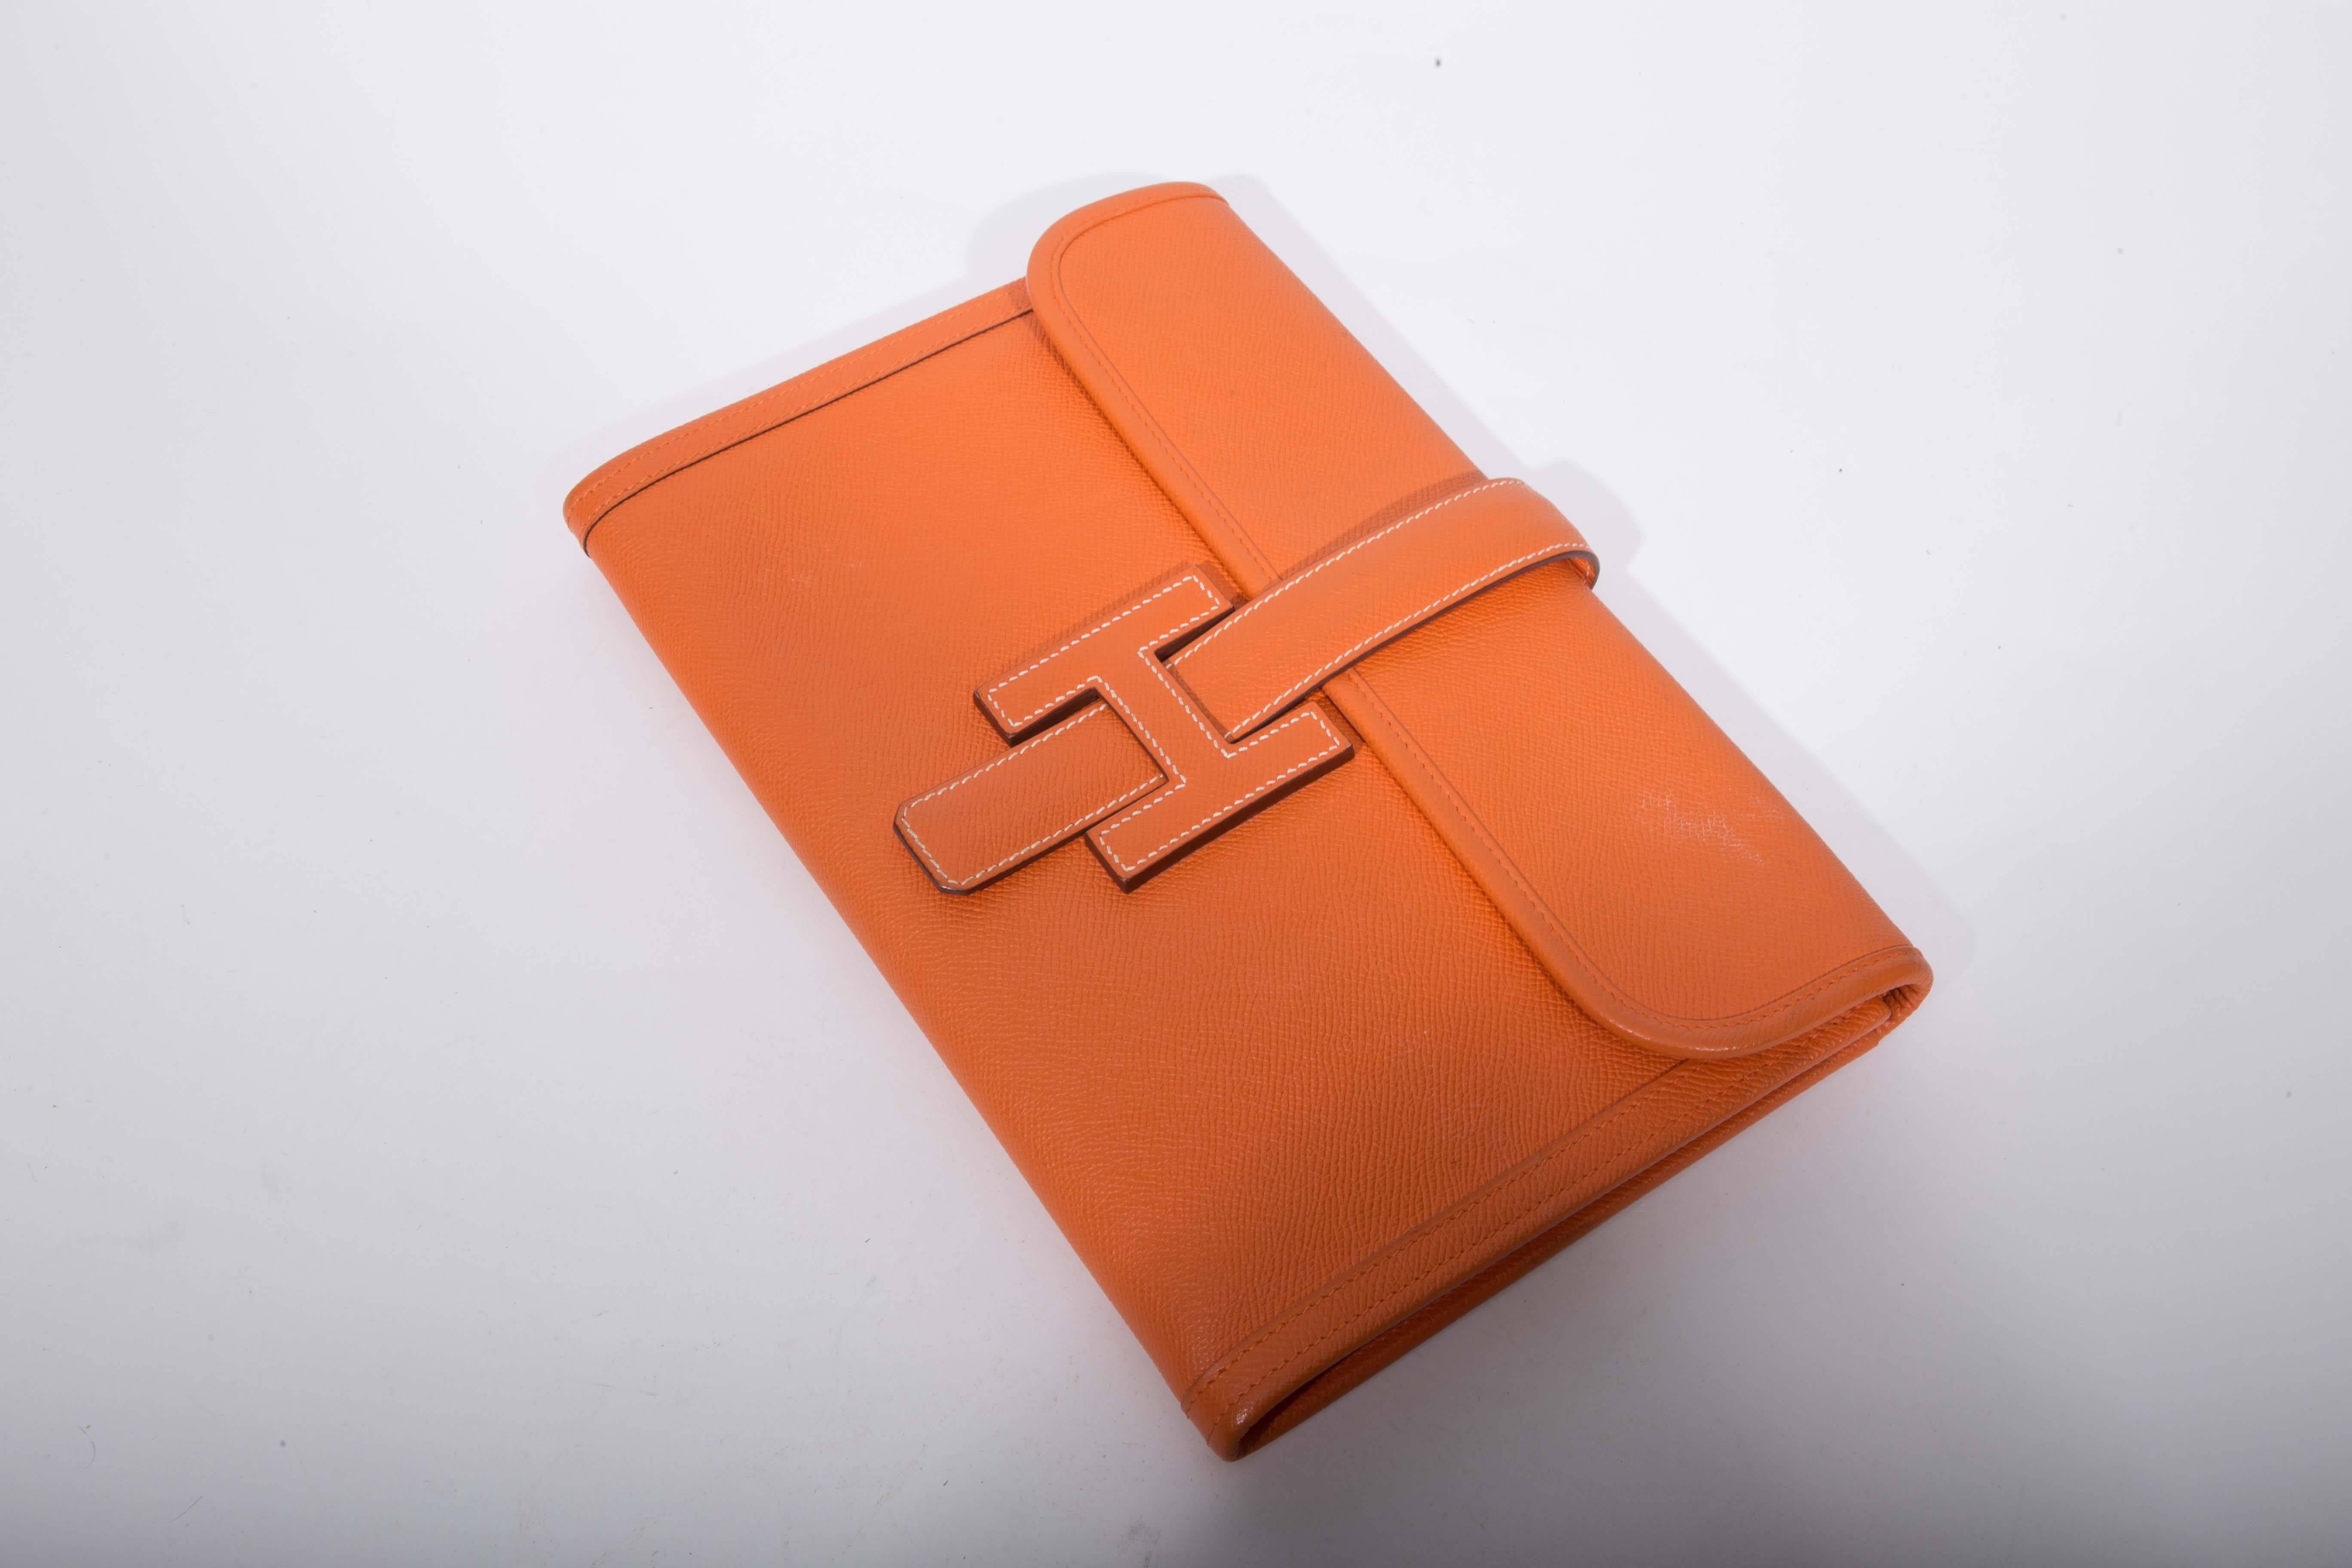 This stunning clutch in orange swift leather is the perfect choice for both day and evening. The Jige clutch closes with the iconic H logo. There are a couple of small marks to the rear of this bag. Interior is immaculate. Includes Hermes dust cover.